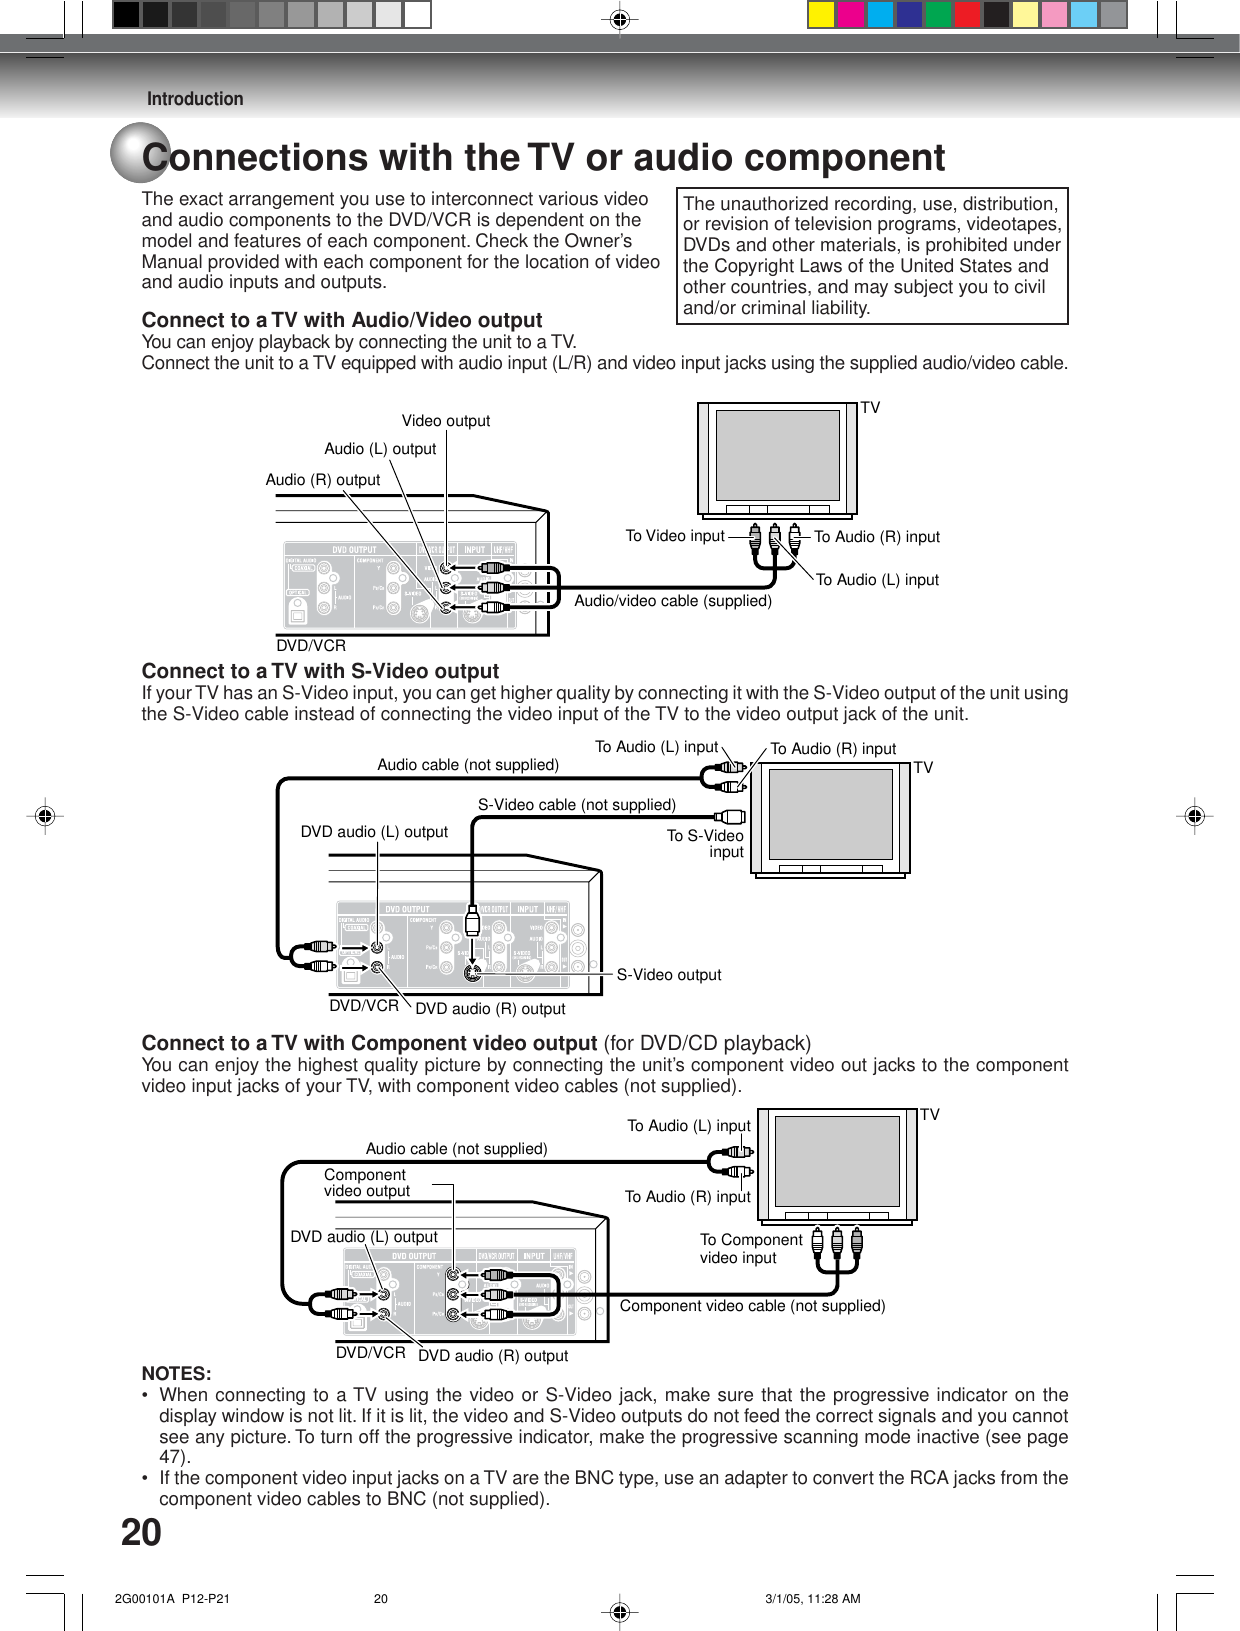 Introduction20Connections with the TV or audio componentThe exact arrangement you use to interconnect various videoand audio components to the DVD/VCR is dependent on themodel and features of each component. Check the Owner’sManual provided with each component for the location of videoand audio inputs and outputs.Connect to a TV with Audio/Video outputYou can enjoy playback by connecting the unit to a TV.Connect the unit to a TV equipped with audio input (L/R) and video input jacks using the supplied audio/video cable.Connect to a TV with S-Video outputIf your TV has an S-Video input, you can get higher quality by connecting it with the S-Video output of the unit usingthe S-Video cable instead of connecting the video input of the TV to the video output jack of the unit.Connect to a TV with Component video output (for DVD/CD playback)You can enjoy the highest quality picture by connecting the unit’s component video out jacks to the componentvideo input jacks of your TV, with component video cables (not supplied).NOTES:• When connecting to a TV using the video or S-Video jack, make sure that the progressive indicator on thedisplay window is not lit. If it is lit, the video and S-Video outputs do not feed the correct signals and you cannotsee any picture. To turn off the progressive indicator, make the progressive scanning mode inactive (see page47).• If the component video input jacks on a TV are the BNC type, use an adapter to convert the RCA jacks from thecomponent video cables to BNC (not supplied).To Audio (R) inputAudio/video cable (supplied)Audio (R) outputTo Audio (L) inputAudio (L) outputTo Video inputVideo output TVDVD/VCRTo Audio (R) inputAudio cable (not supplied)DVD audio (R) outputDVD audio (L) outputS-Video outputTo S-Video inputS-Video cable (not supplied)To Audio (L) inputTVDVD/VCRTo Audio (R) inputAudio cable (not supplied)DVD audio (R) outputTo Audio (L) inputDVD audio (L) outputTVDVD/VCRComponent video cable (not supplied)Componentvideo outputTo Component video inputThe unauthorized recording, use, distribution,or revision of television programs, videotapes,DVDs and other materials, is prohibited underthe Copyright Laws of the United States andother countries, and may subject you to civiland/or criminal liability. 2G00101A  P12-P21 3/1/05, 11:28 AM20